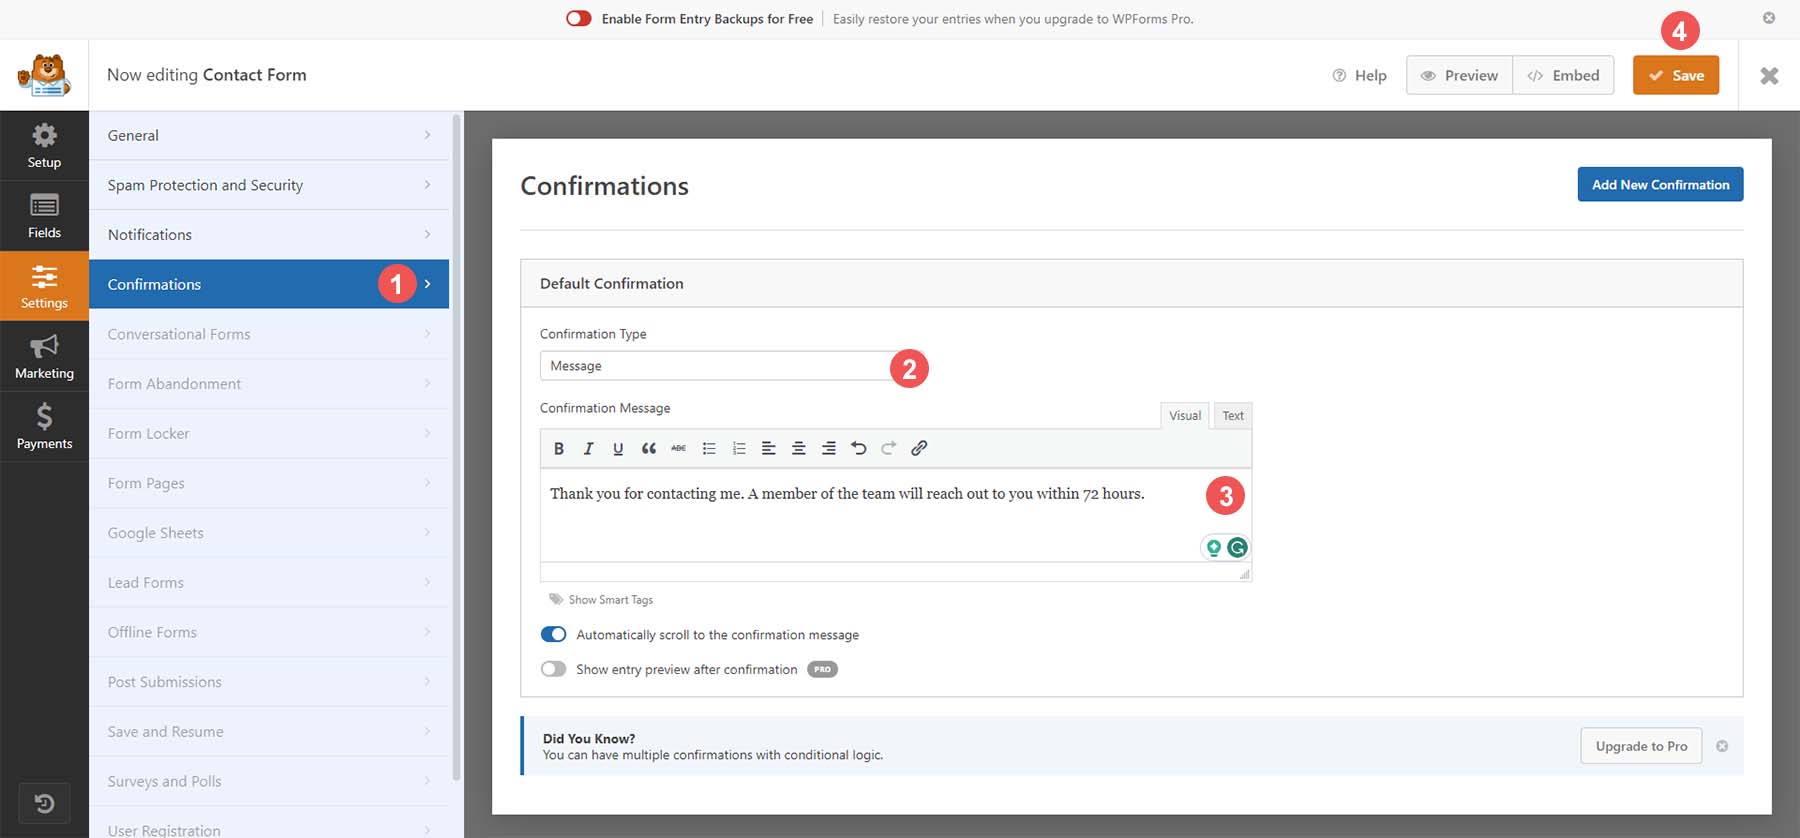 Add confirmation message to your form